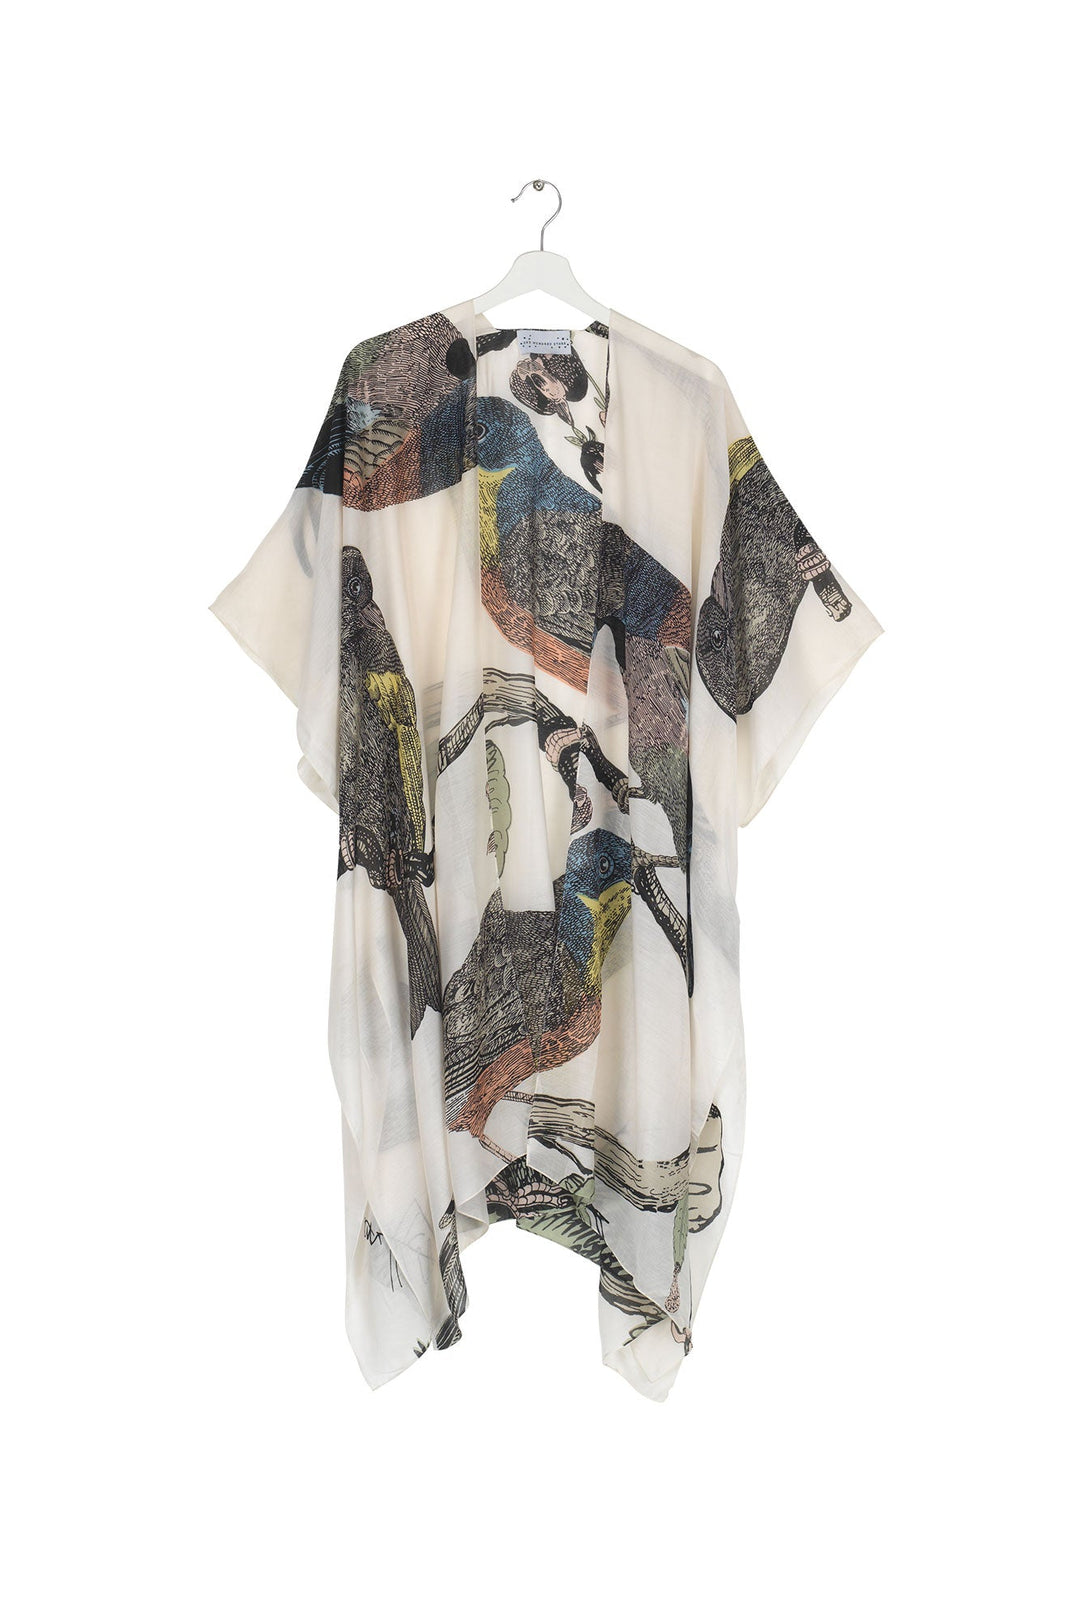 Women's lightweight throwover shawl with bird print on a stone background by One Hundred Stars